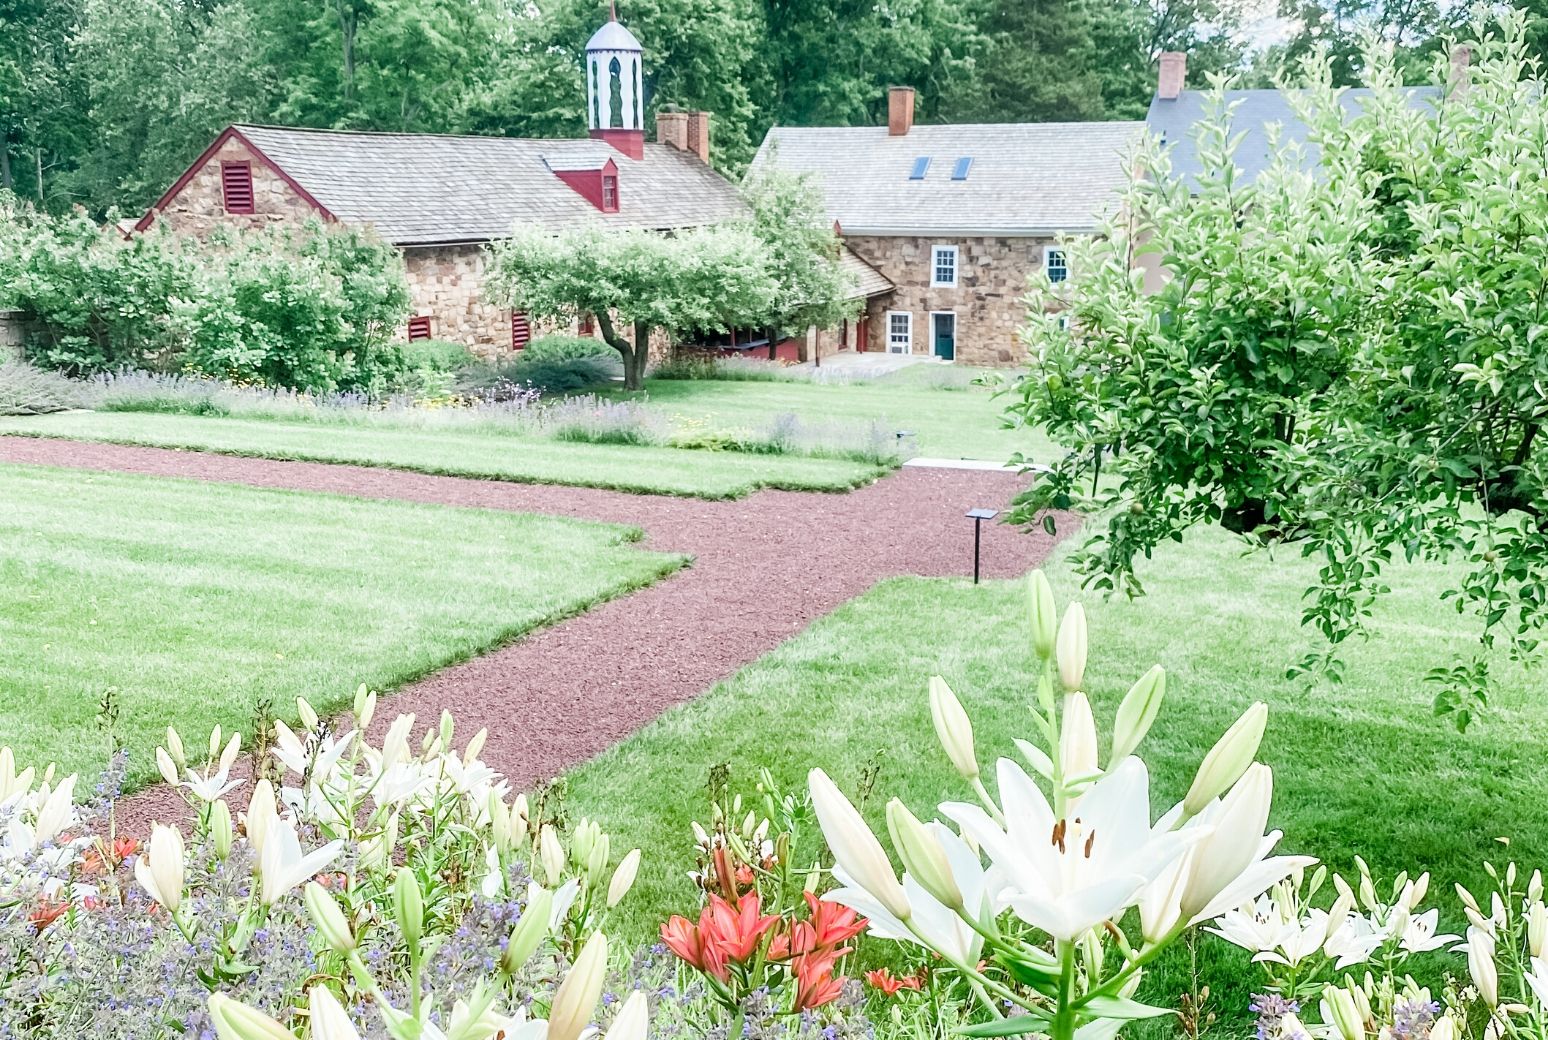 Coleman Gardens is one of Elizabeth Furnace's outdoor event spaces in Lancaster PA